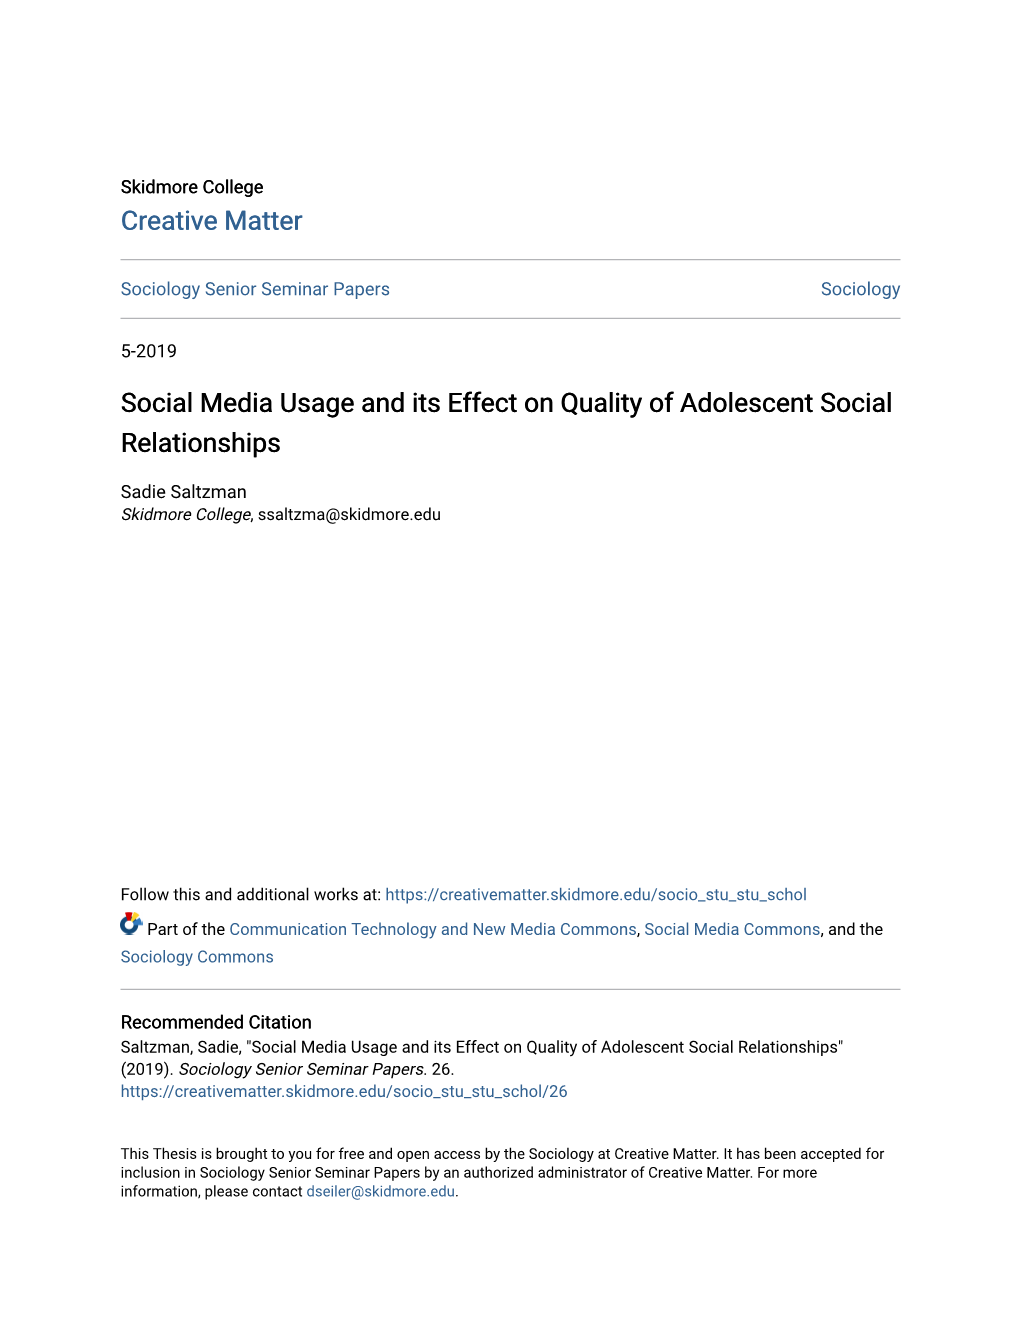 Social Media Usage and Its Effect on Quality of Adolescent Social Relationships